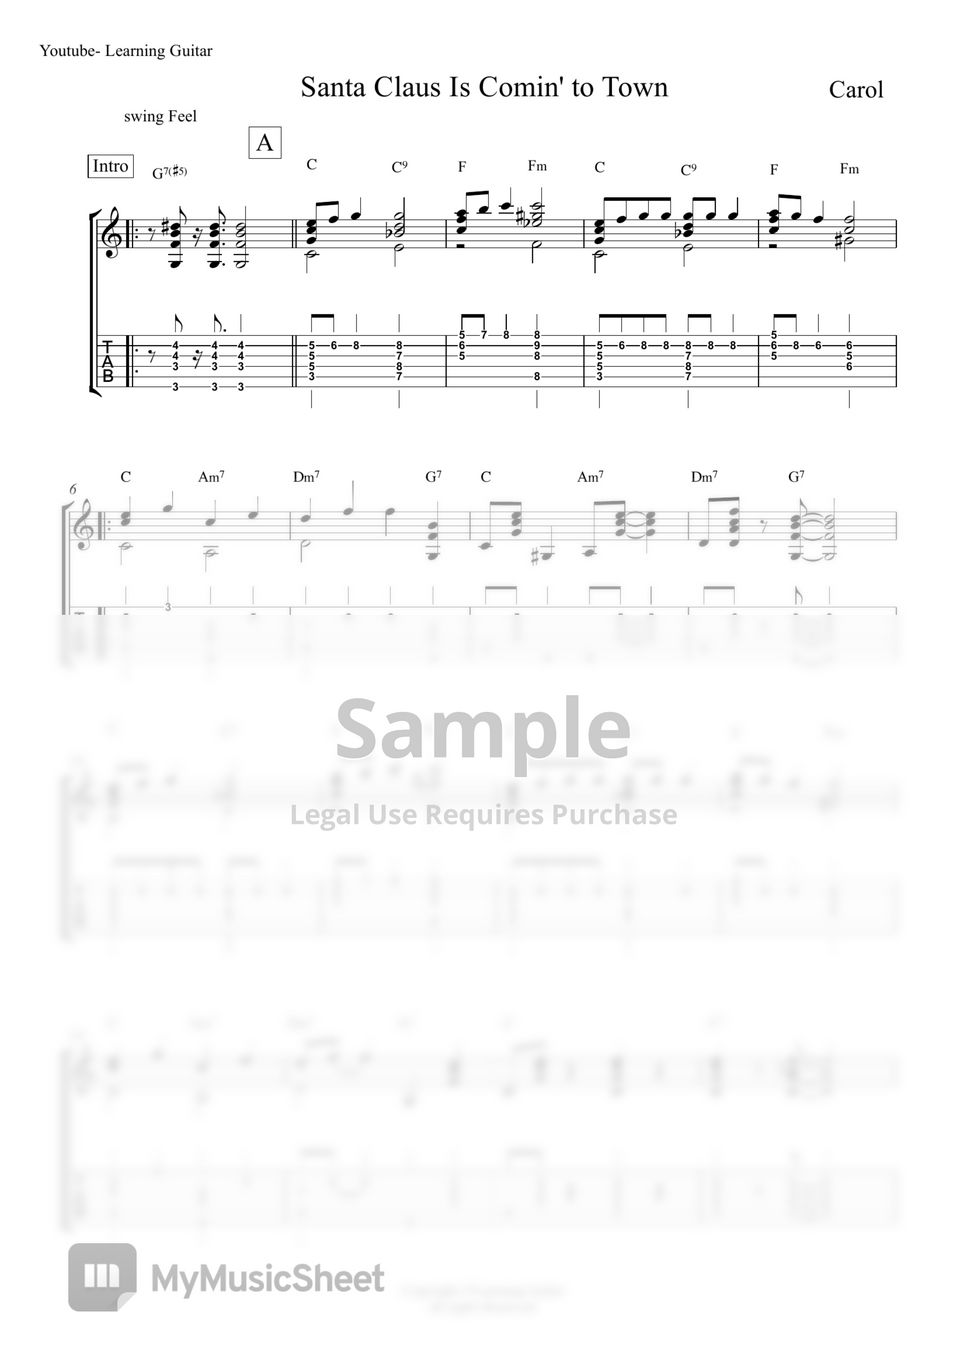 Carol - Santa Claus Comin' to Town (Fingerstyle TAB) by Learning Guitar